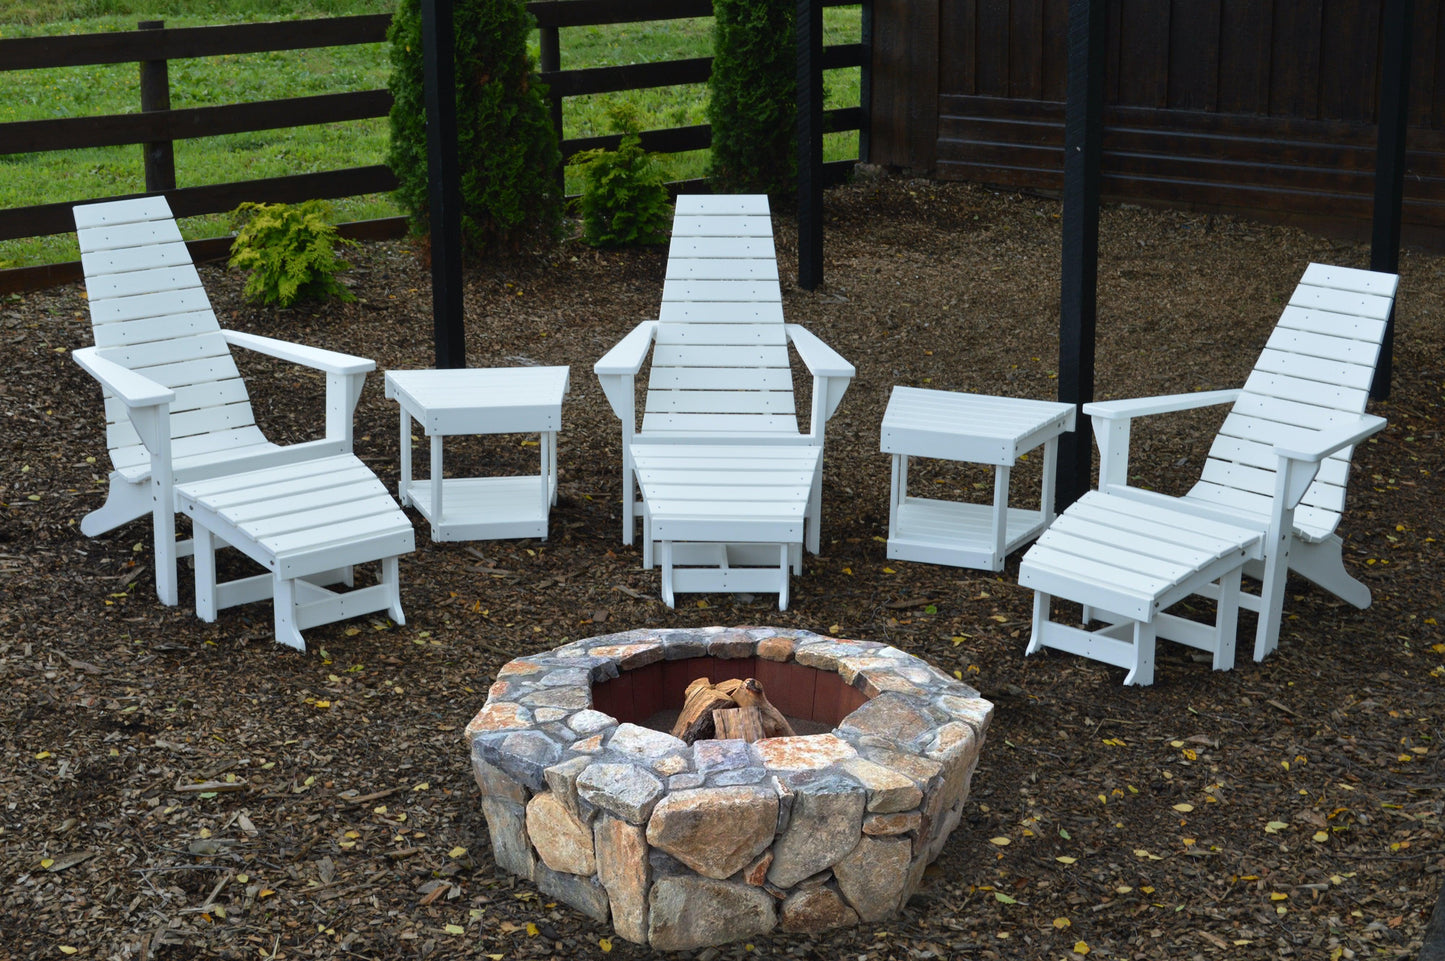 A&L Furniture Co. Recycled Plastic New Hope Contemporary Adirondack Chair - LEAD TIME TO SHIP 10 BUSINESS DAYS